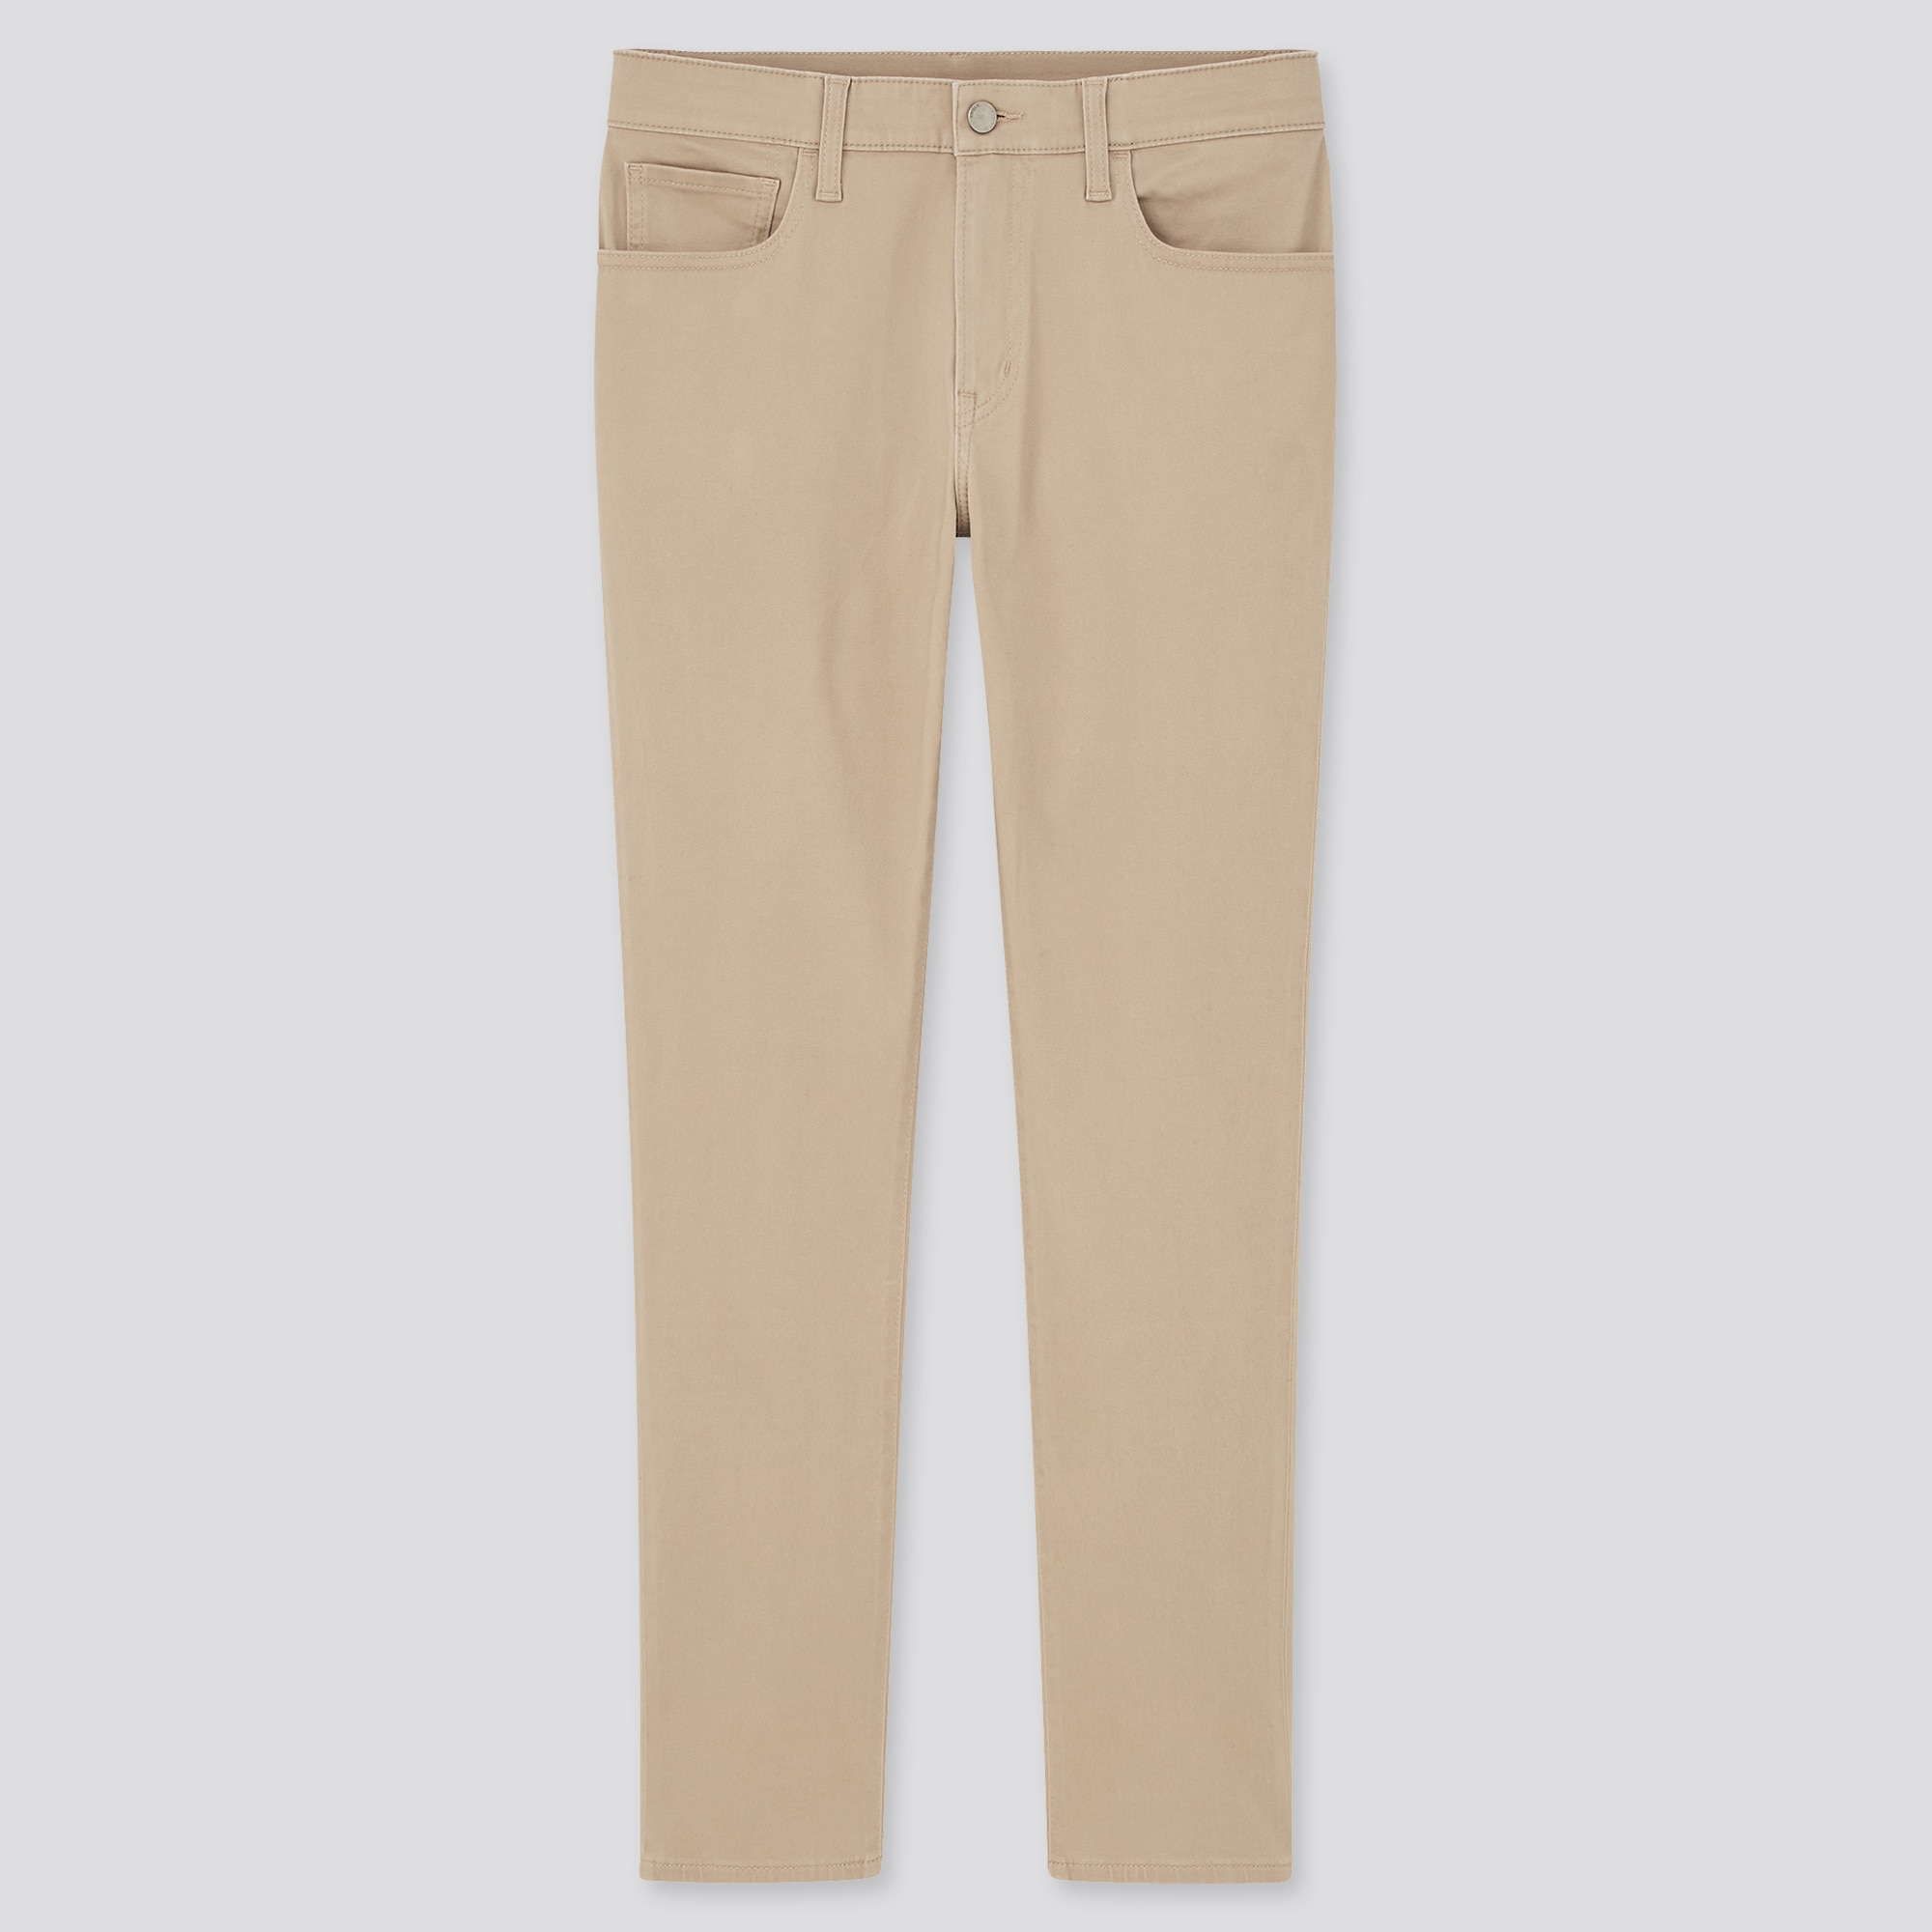 uniqlo ezy skinny fit color jeans